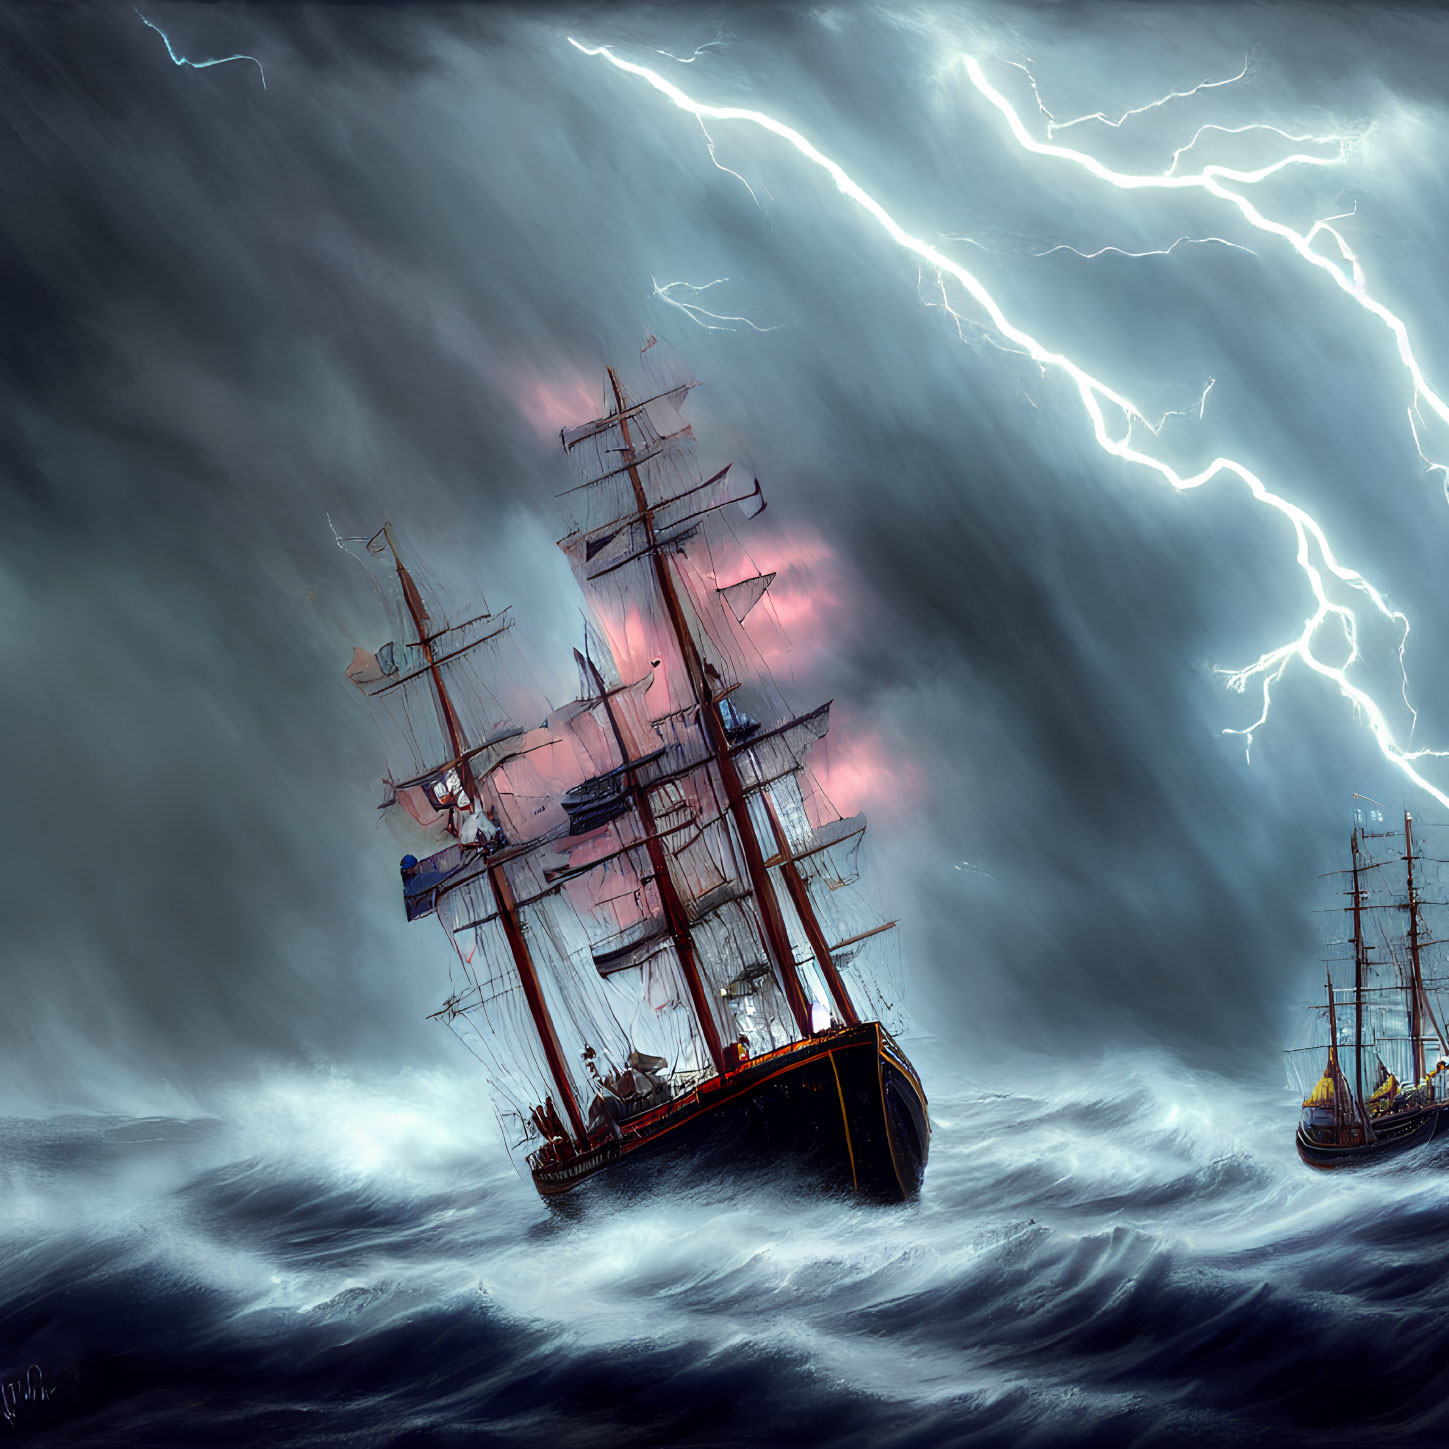 Stormy seas with sailing ships and lightning in dramatic scene